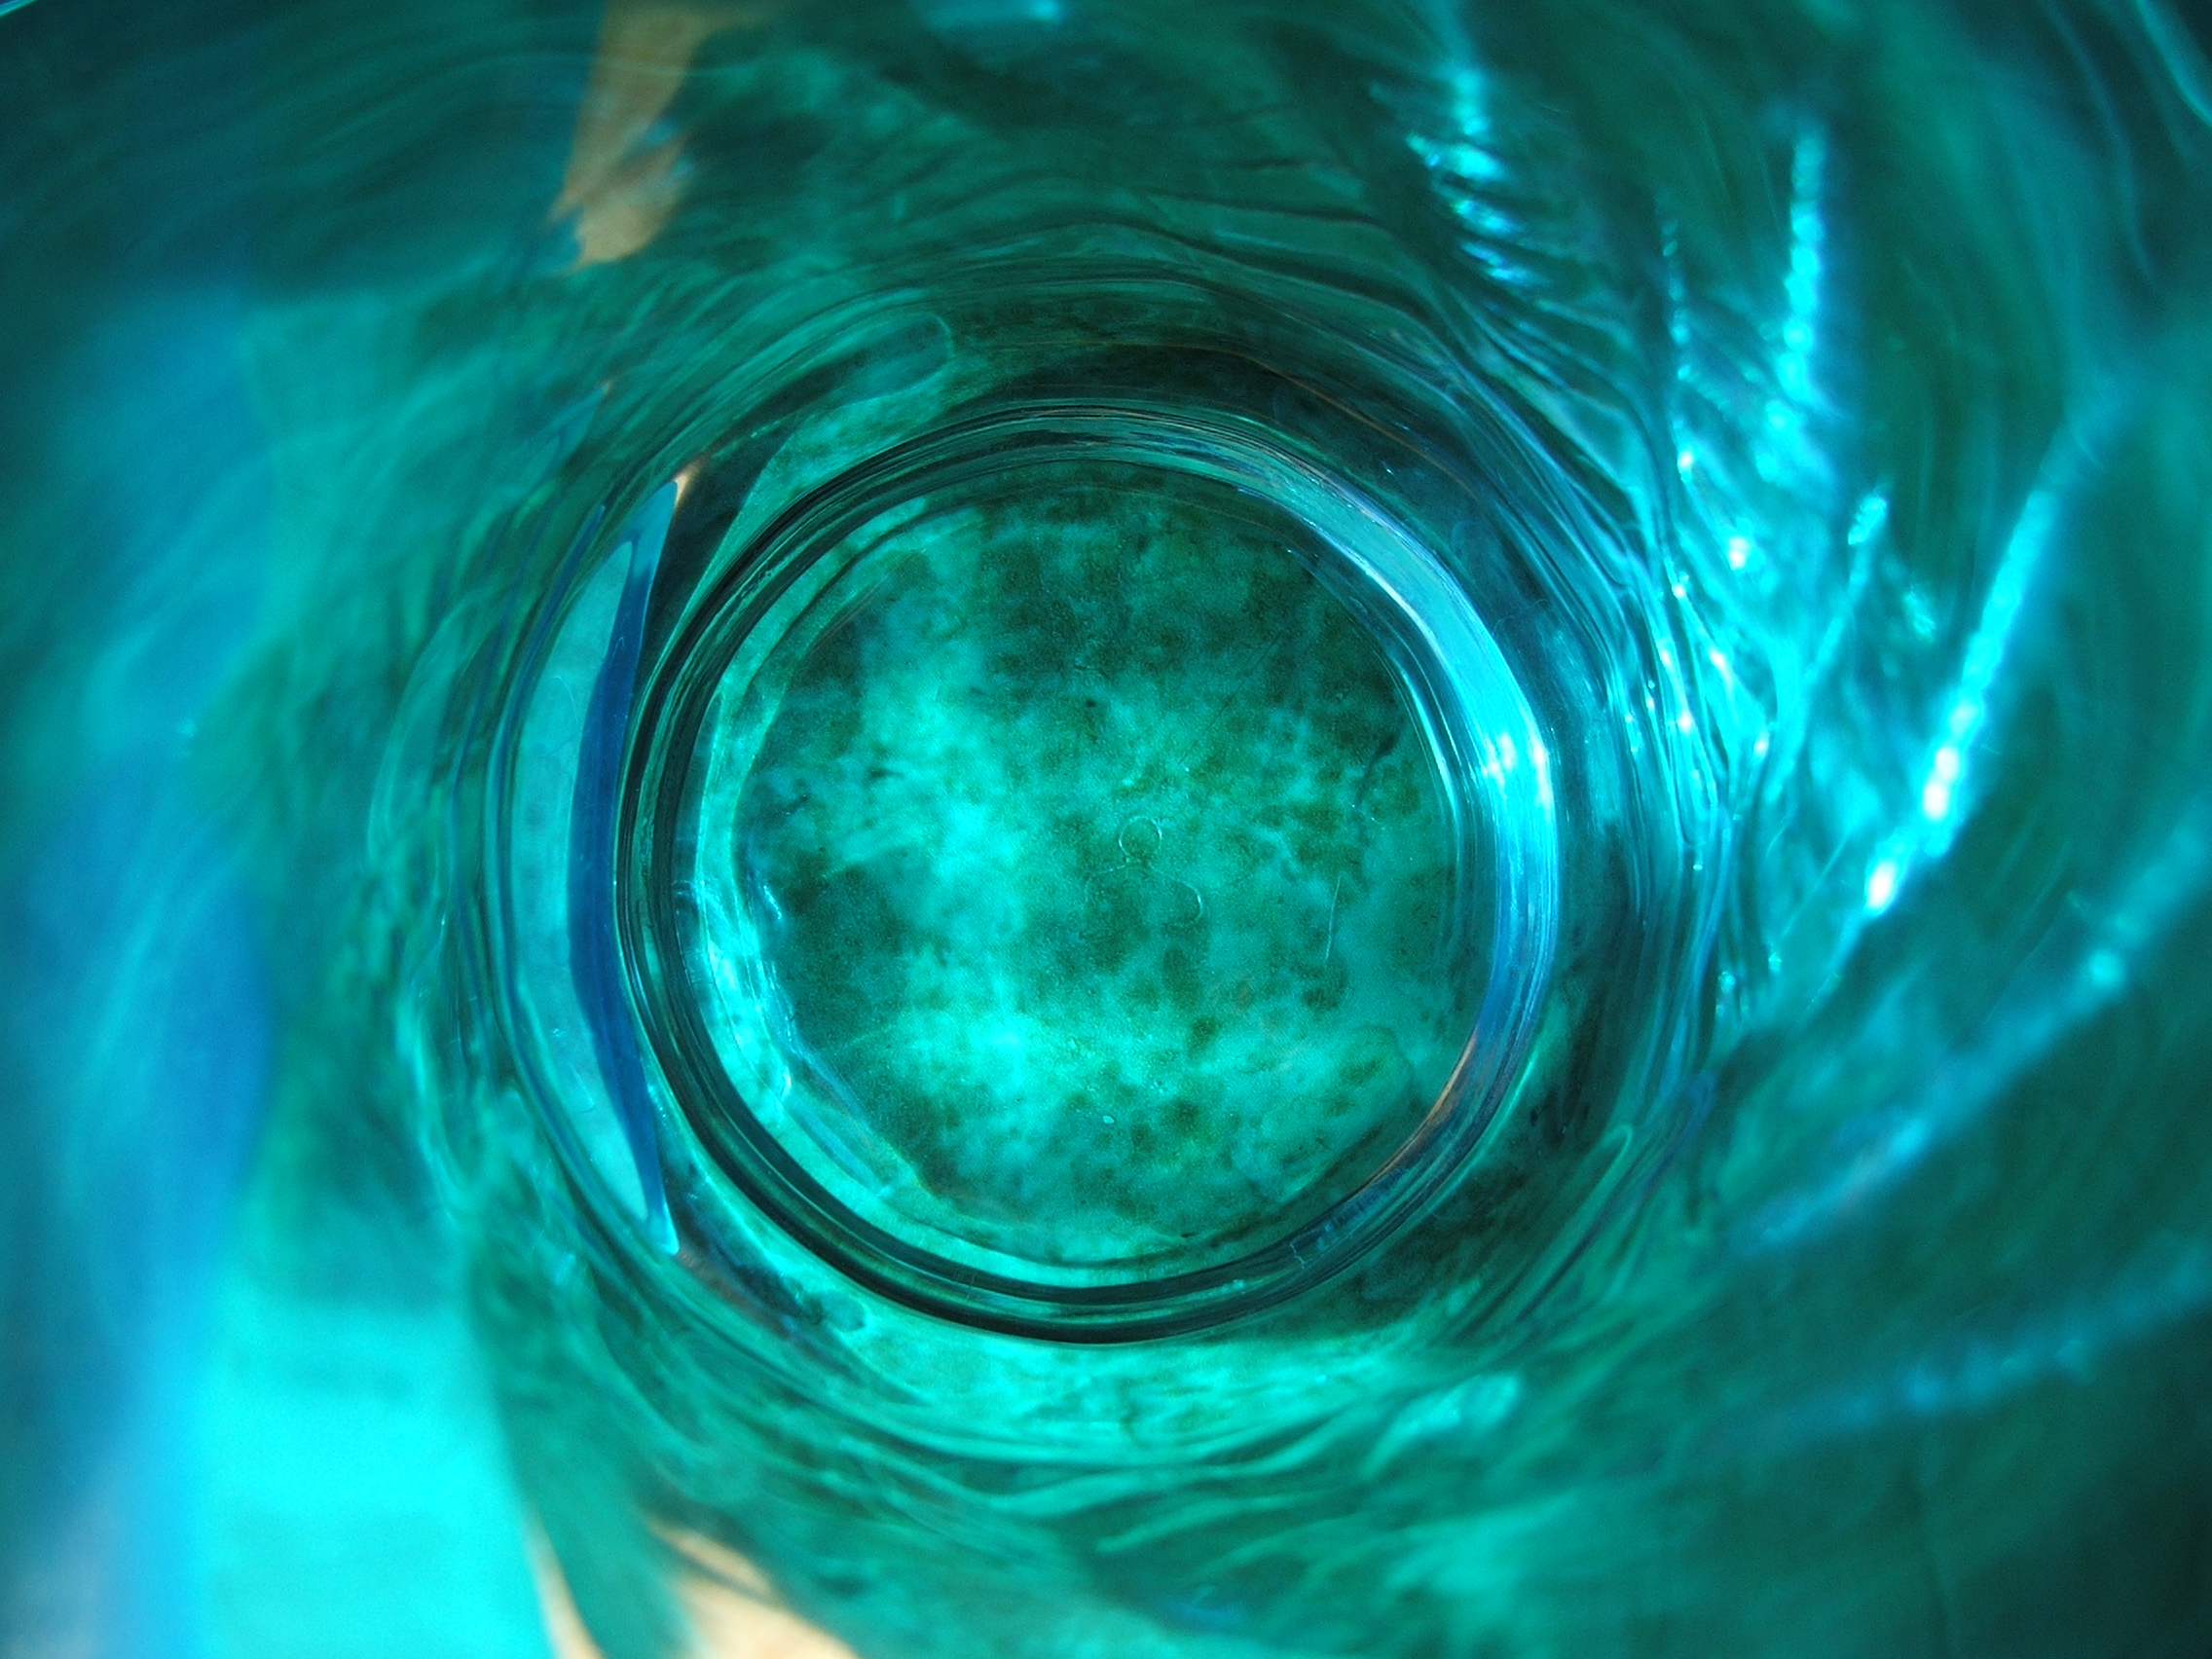 Abstract glass photo